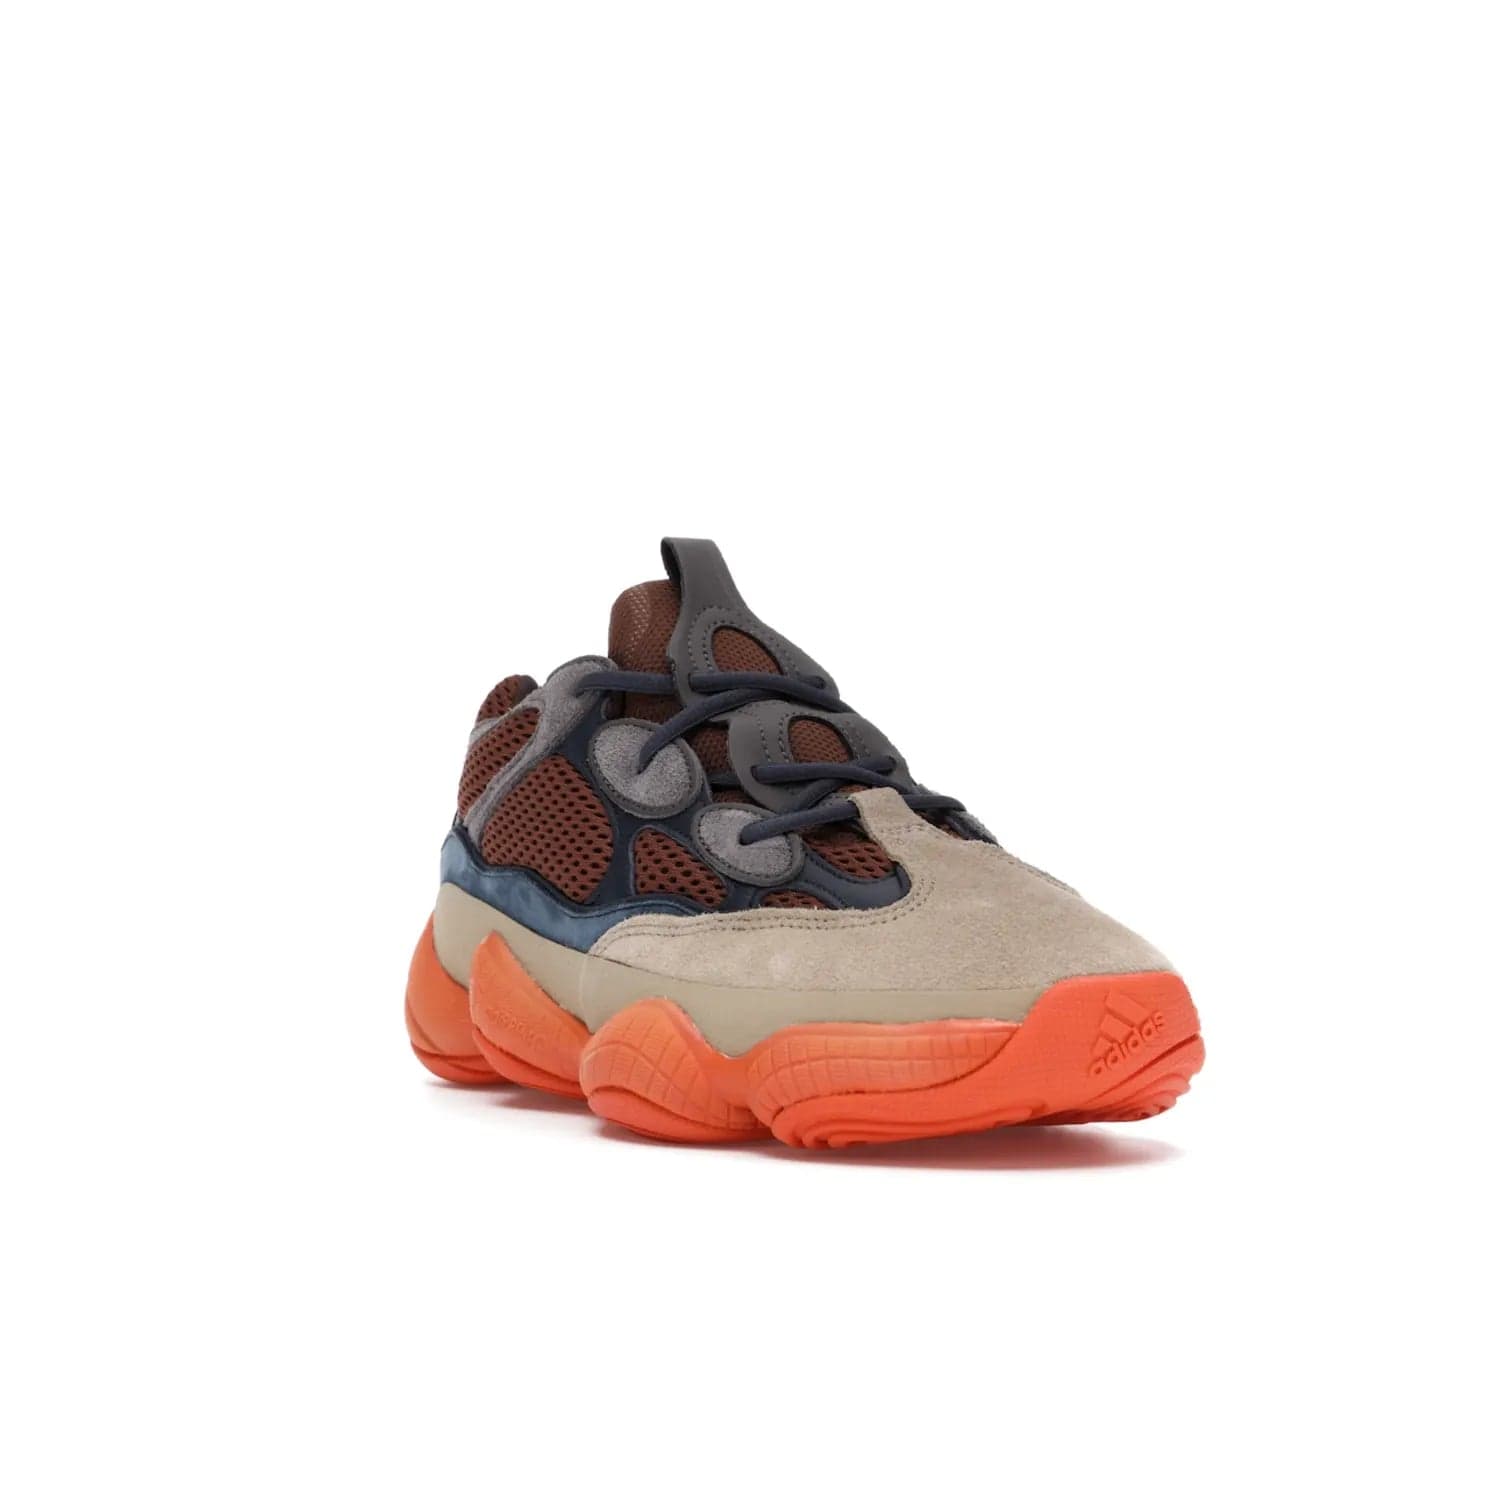 adidas Yeezy 500 Enflame - Image 7 - Only at www.BallersClubKickz.com - Step into style with the adidas Yeezy 500 Enflame. Mix of mesh, leather, and suede layered together to create tonal-brown, dark blue, & orange. Orange AdiPRENE sole provides superior cushioning & comfort. Get yours and experience maximum style.